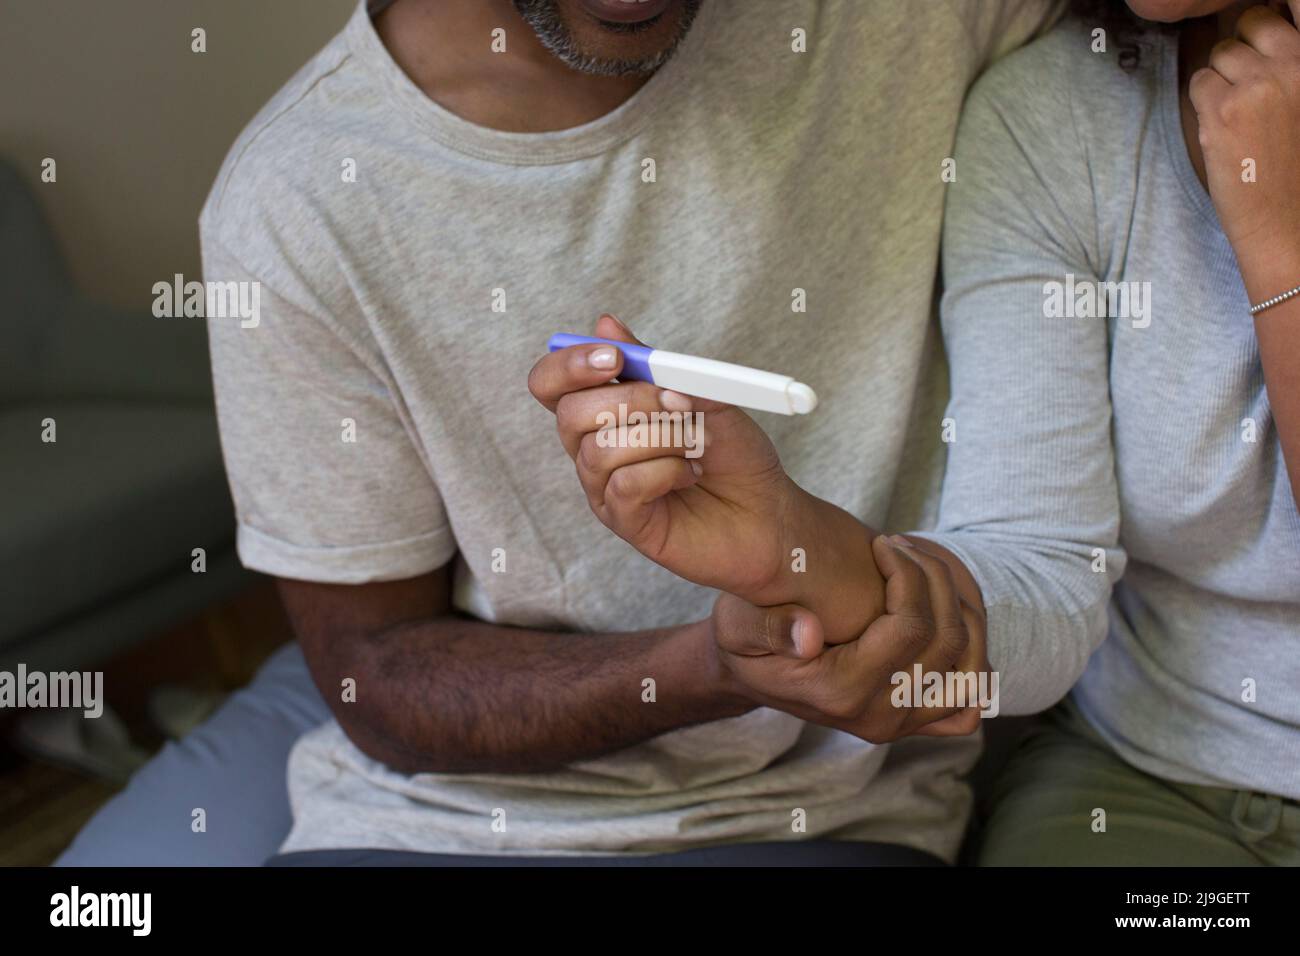 Close up of a woman's hand holding a pregnancy test kit Stock Photo